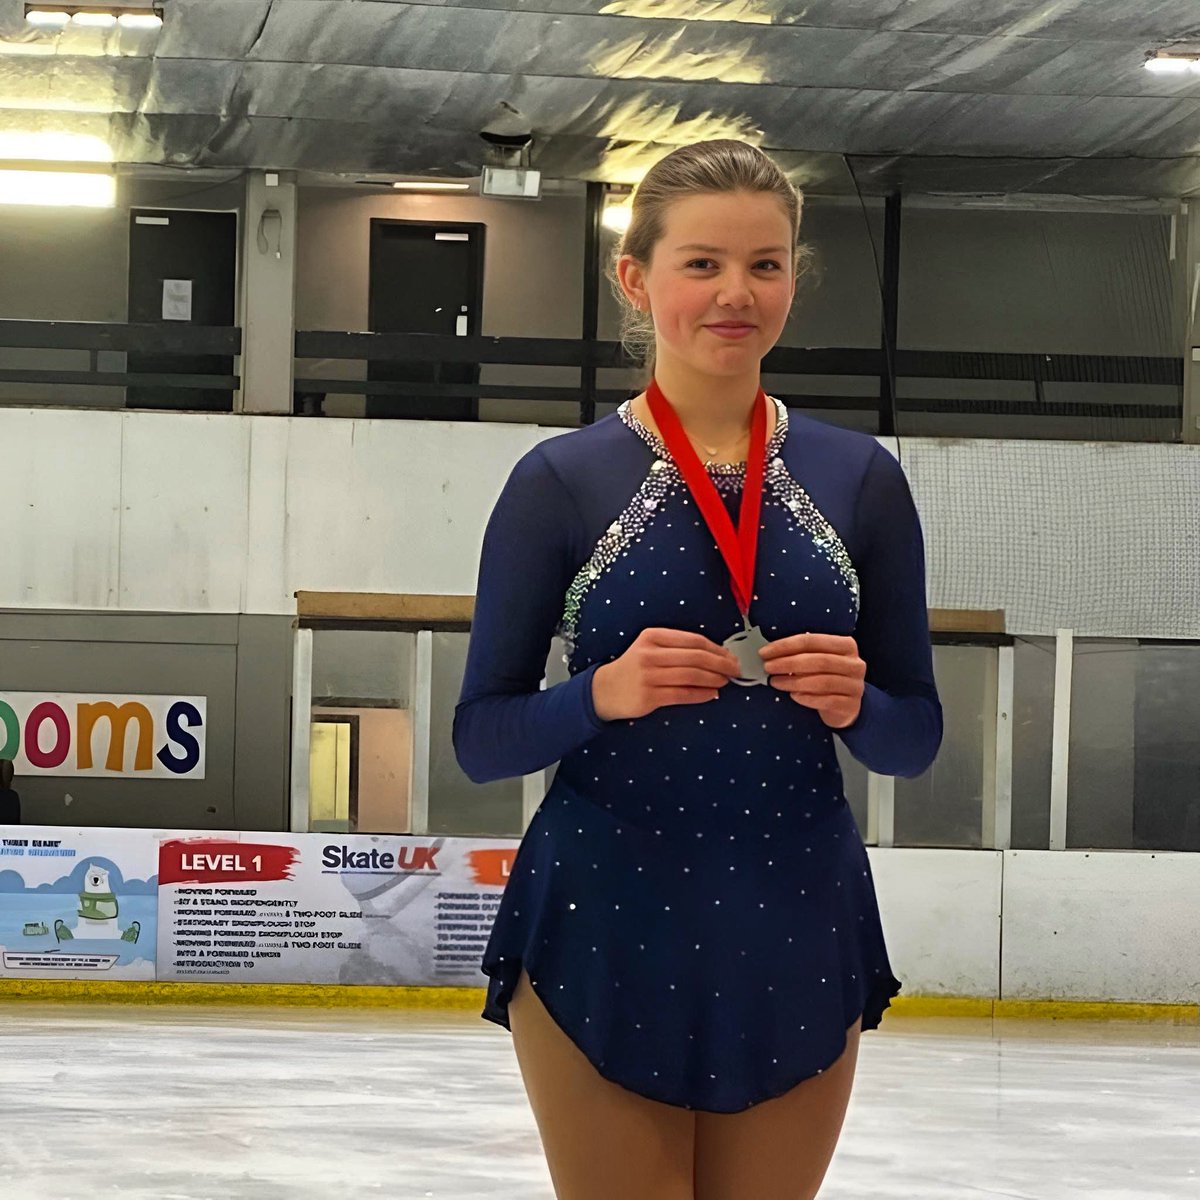 ⛸️ Congratulations to our pupil, Tamara, for winning second place in the Bradford Open skating competition.

We wish Tamara all the best in her upcoming competitions!

#wearehenrys #iceskating #sport #schoolnews #coventry